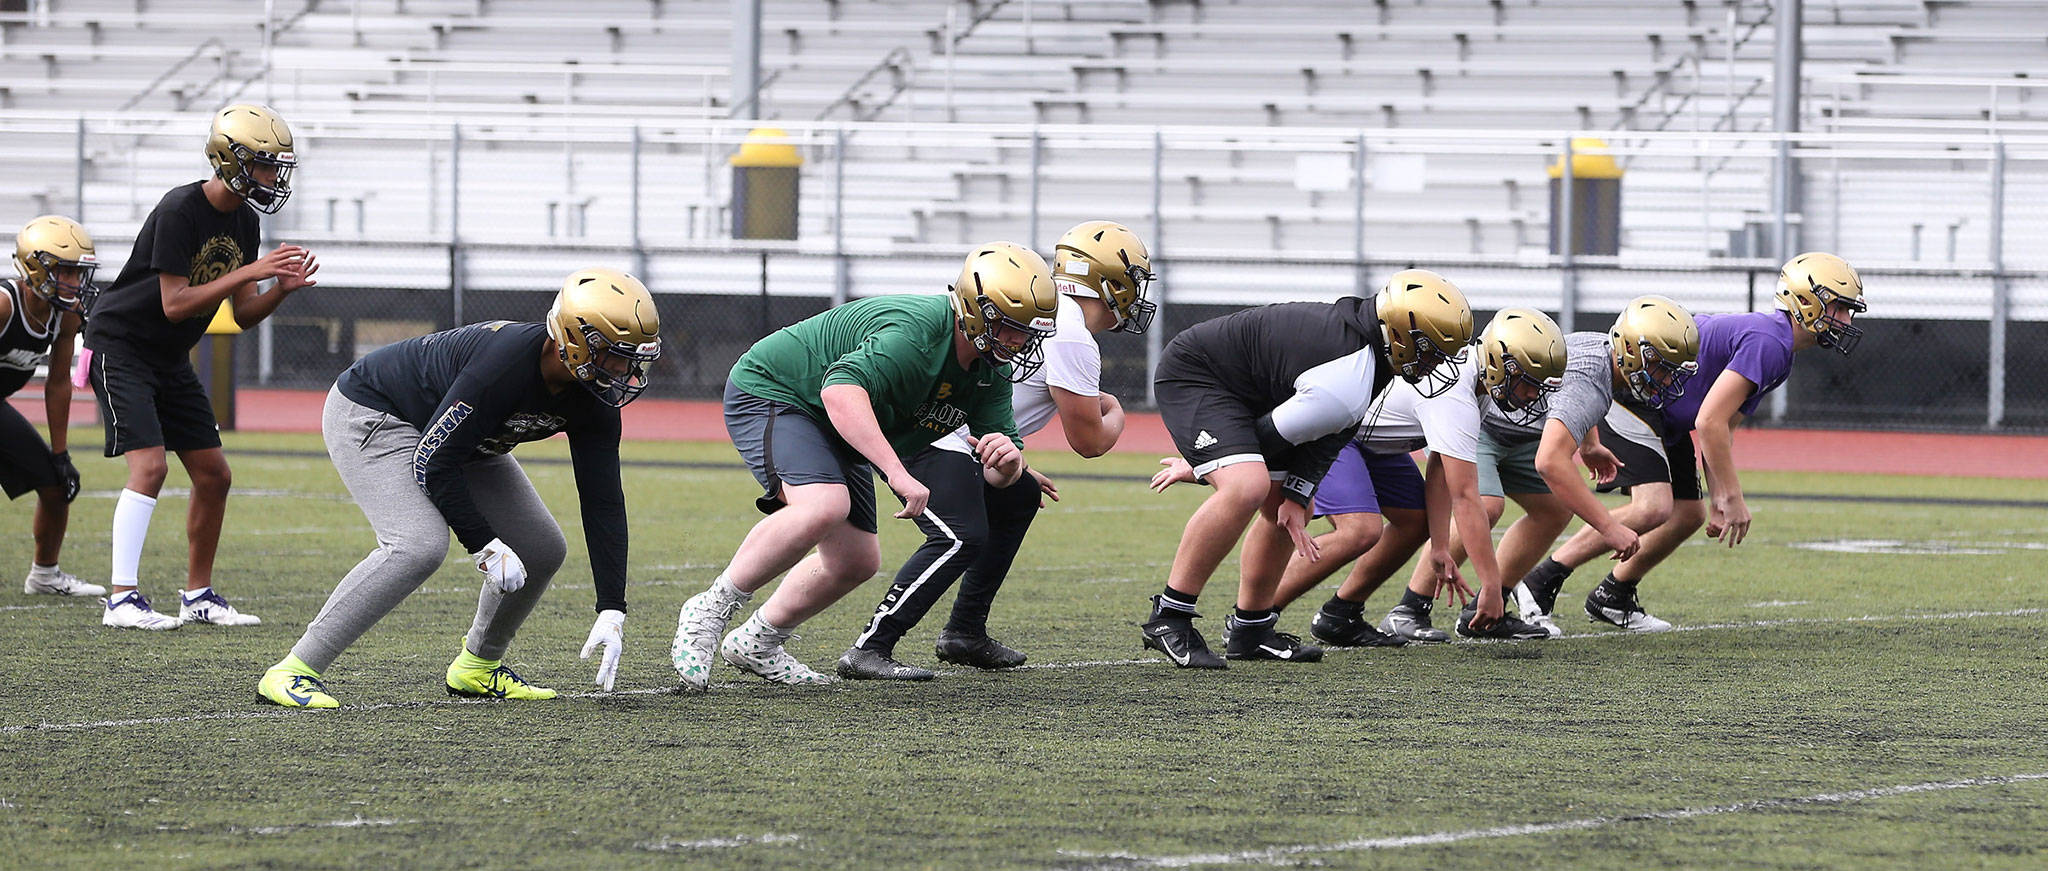 Oak Harbor fires off the line during the first day of football practice Wednesday. (Photo by John Fisken)